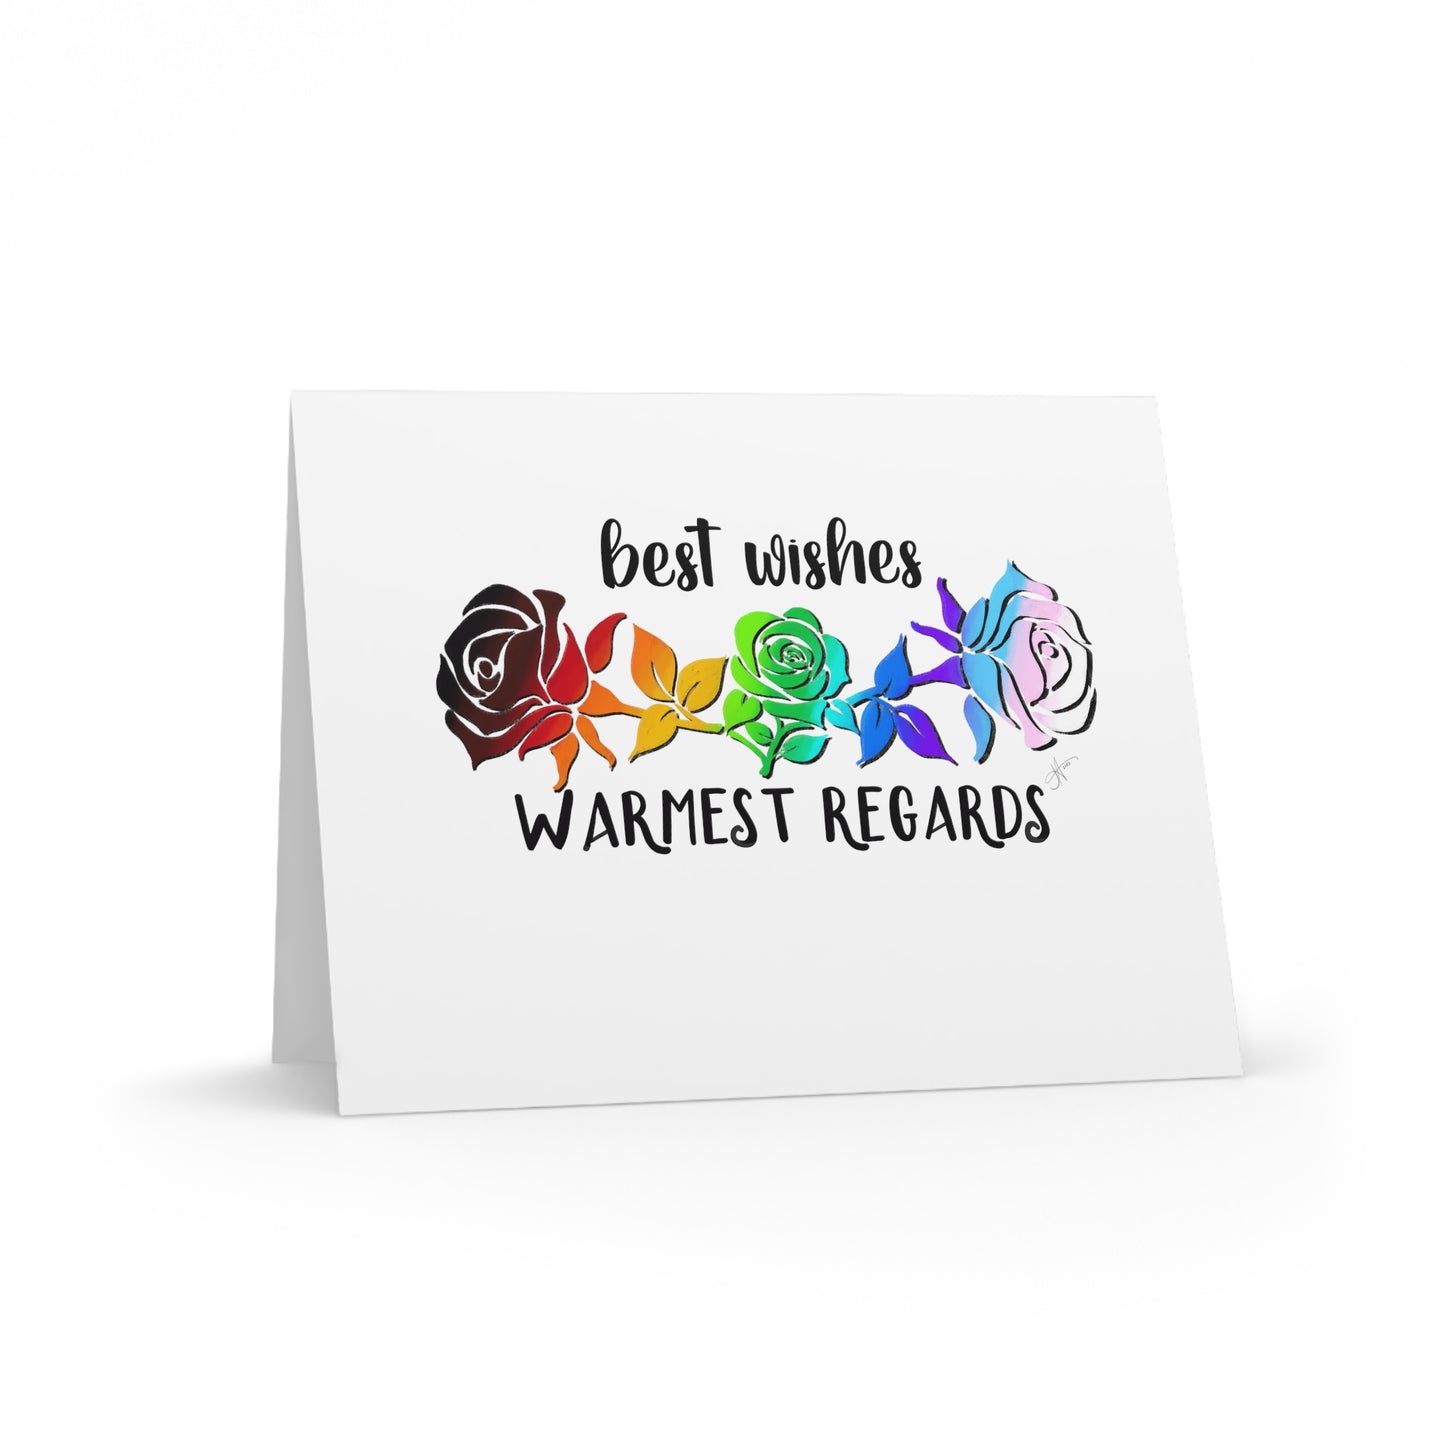 Best Wishes - Greeting cards (8 pack w/ envelopes)